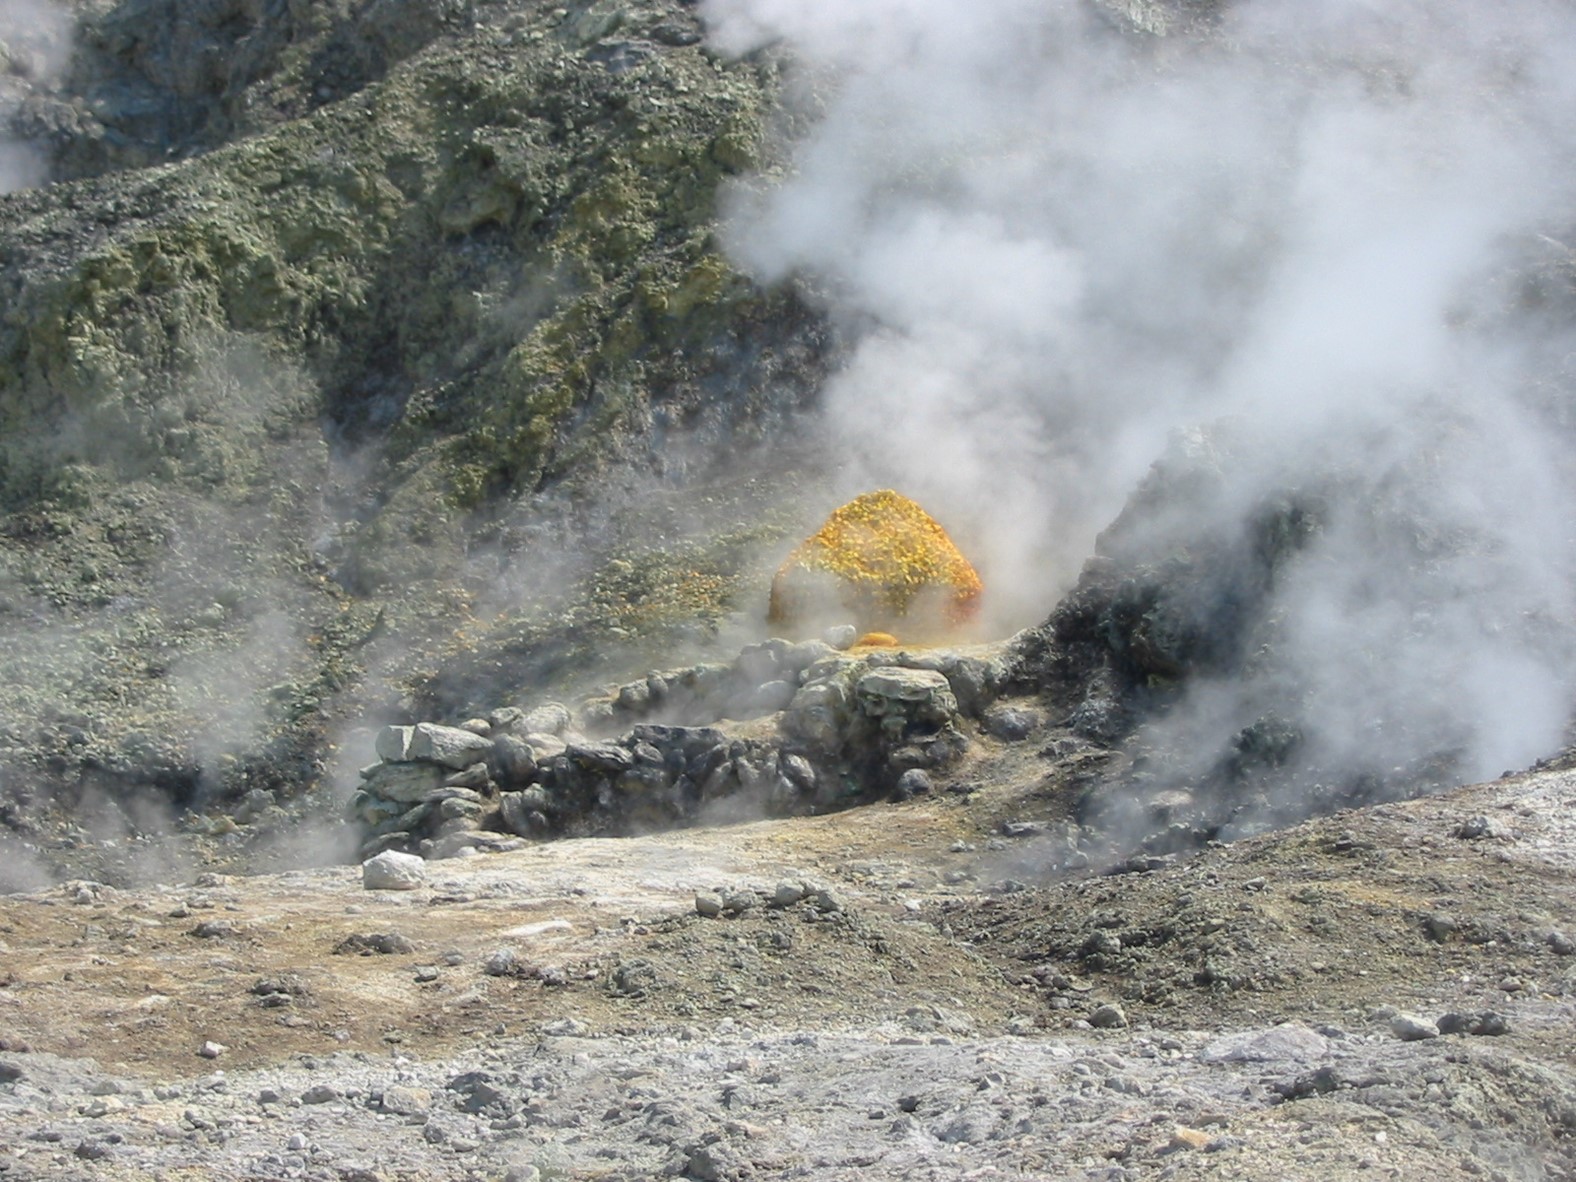 Sulfur deposits near an active fumarole within the Solfatara crater in 2003